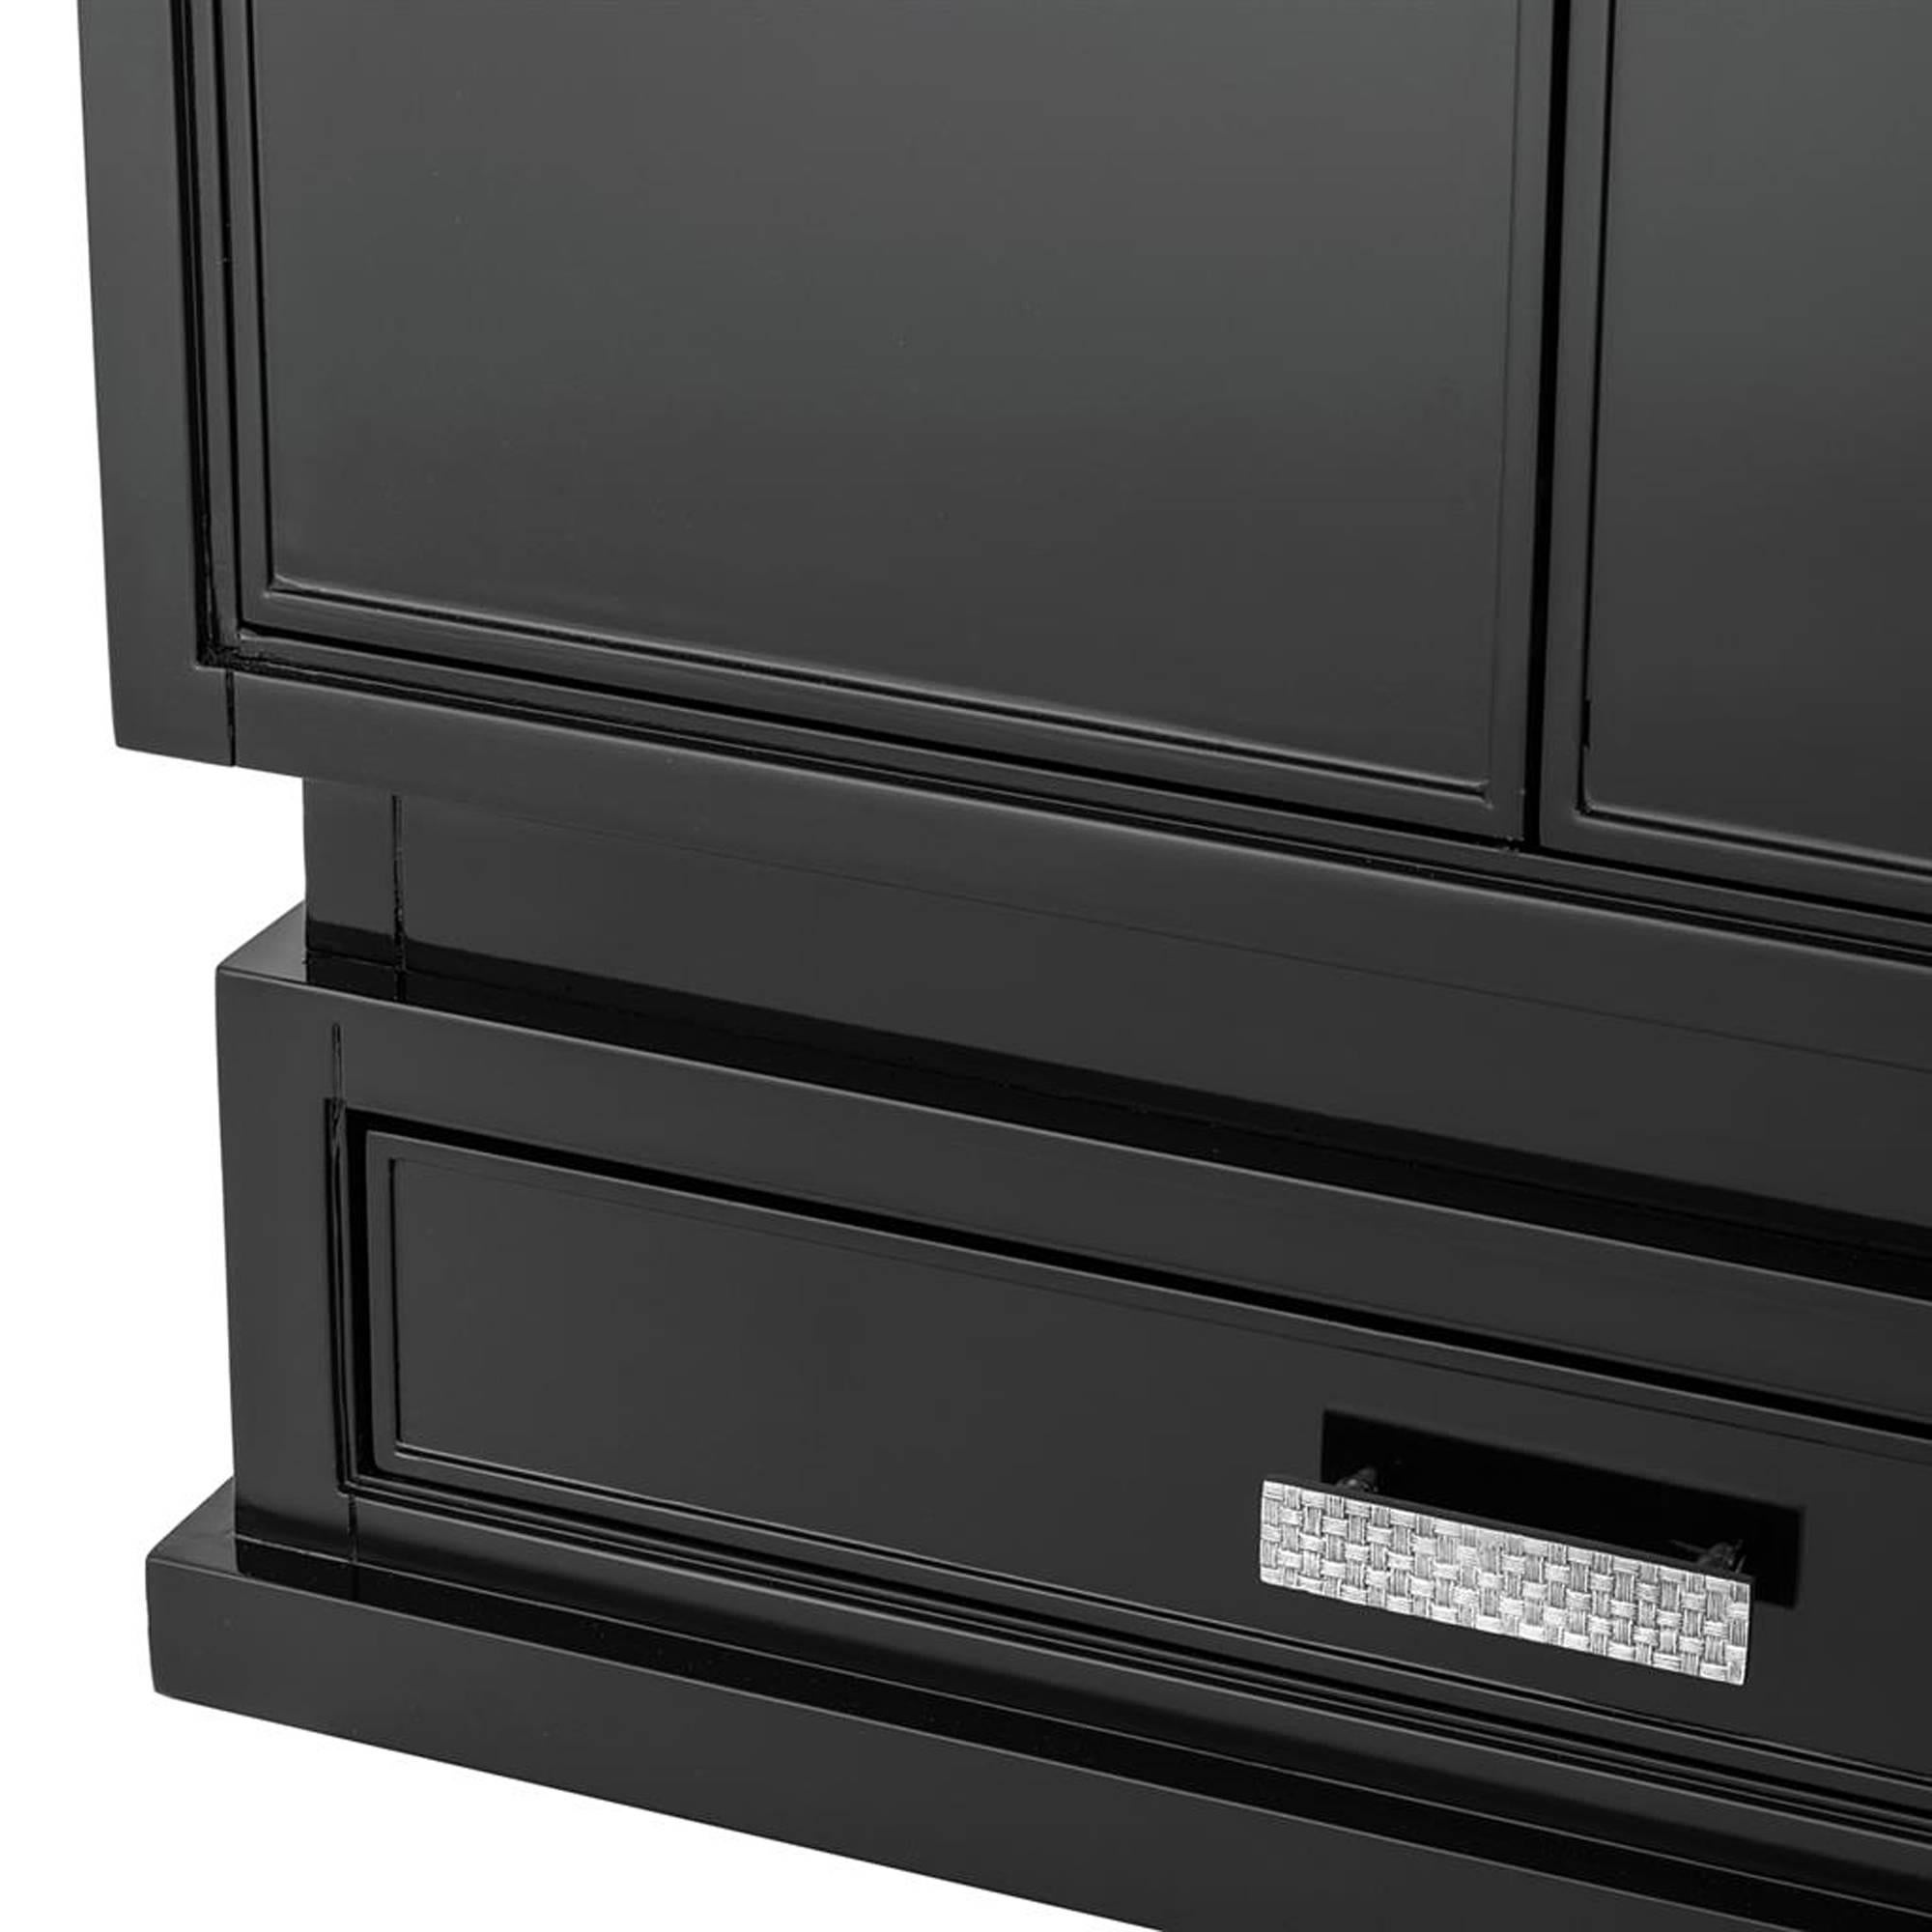 Contemporary Tokyo Black Cabinet or Wardrobe in Birchwood and Nickel Finishes